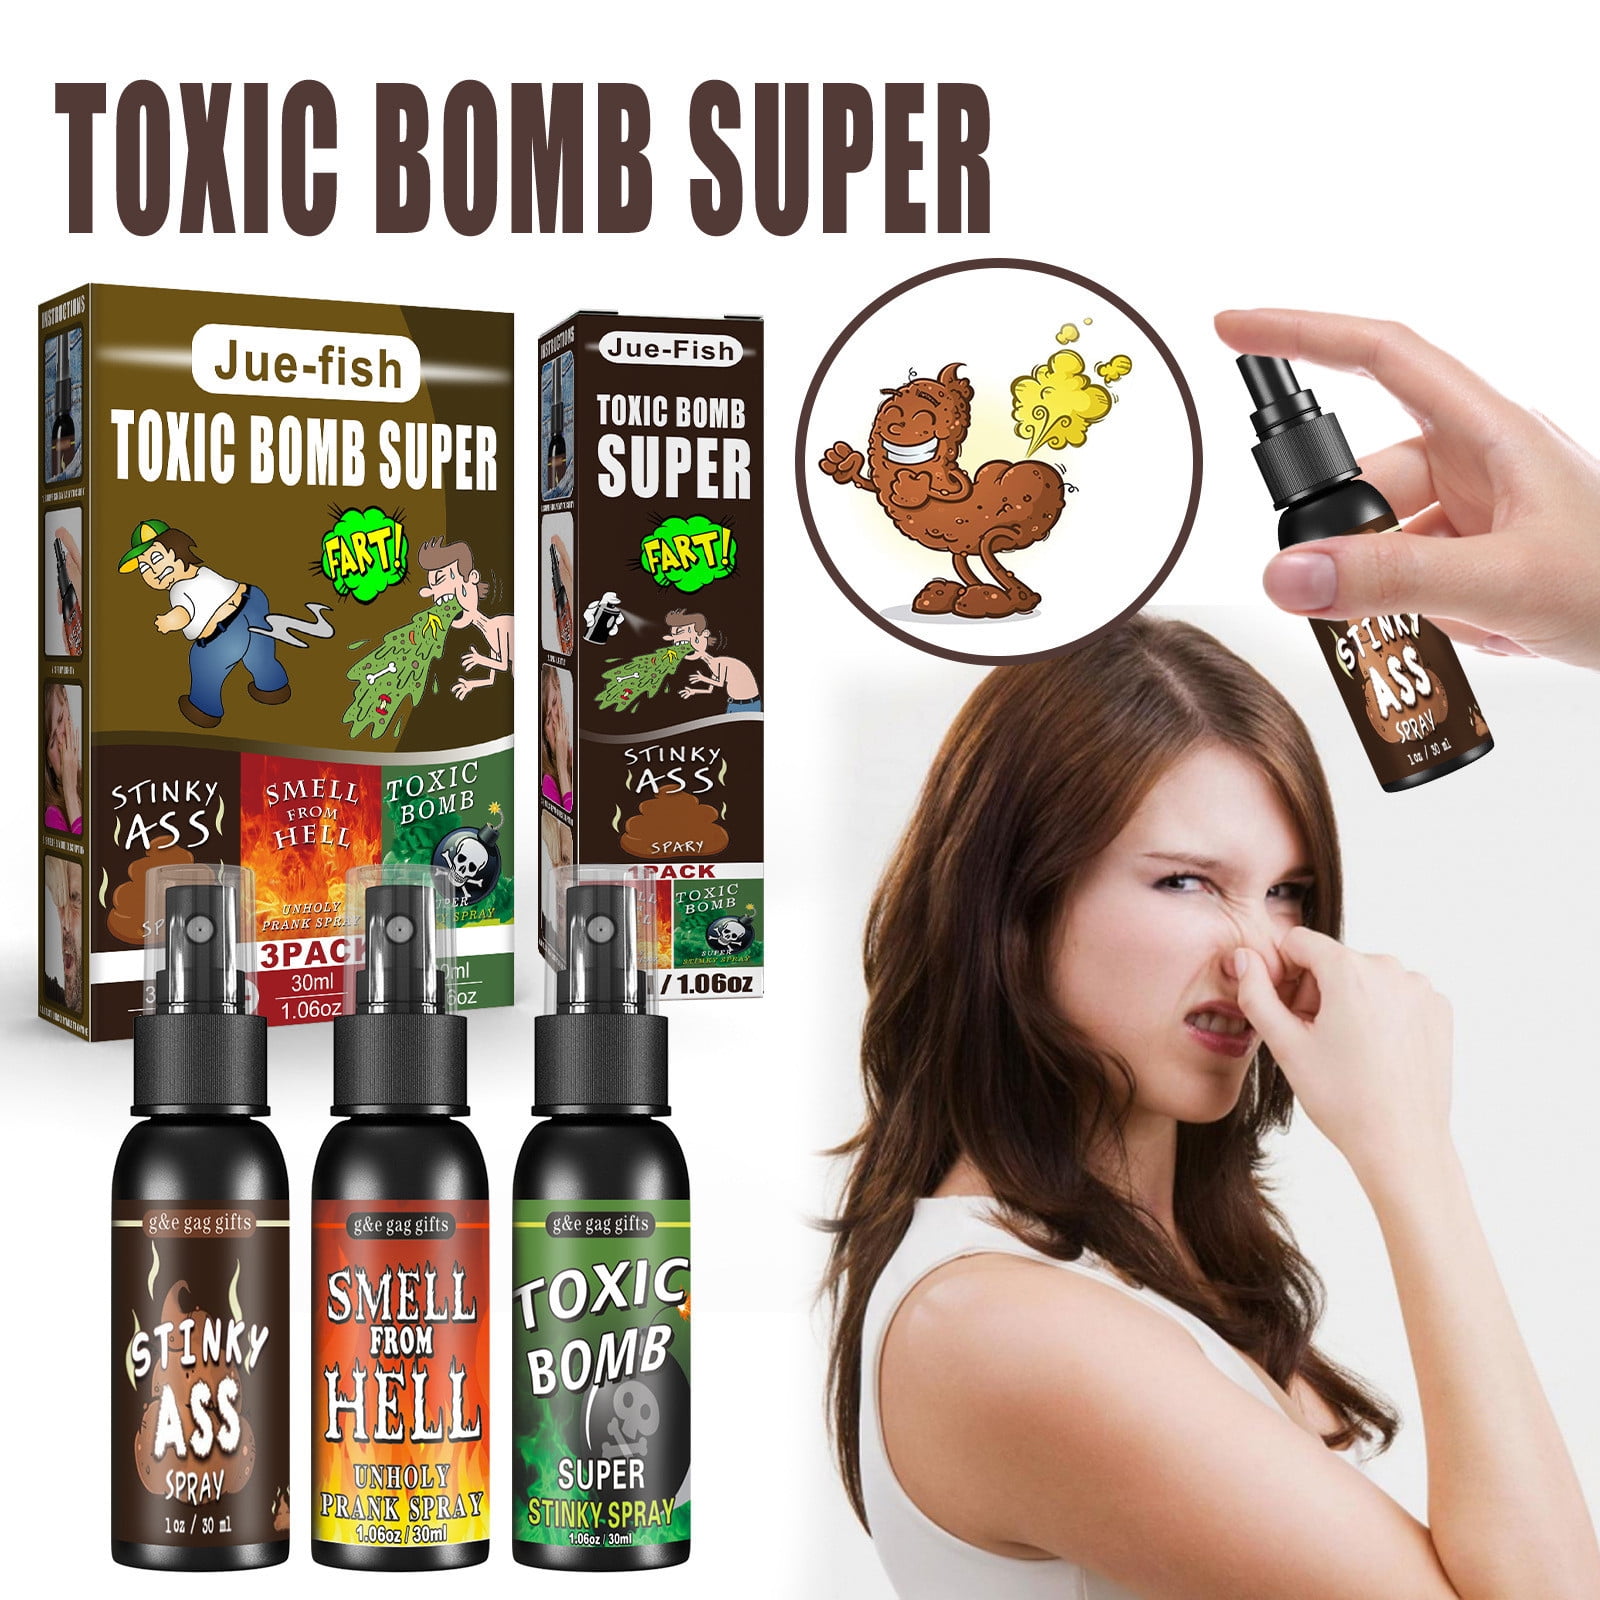  Stinky Ass Toxic Bomb Prank Fart Spray - 1 oz. Bottle - Nasty  Fart Spray That Smells Horrible - Made in The USA : Toys & Games